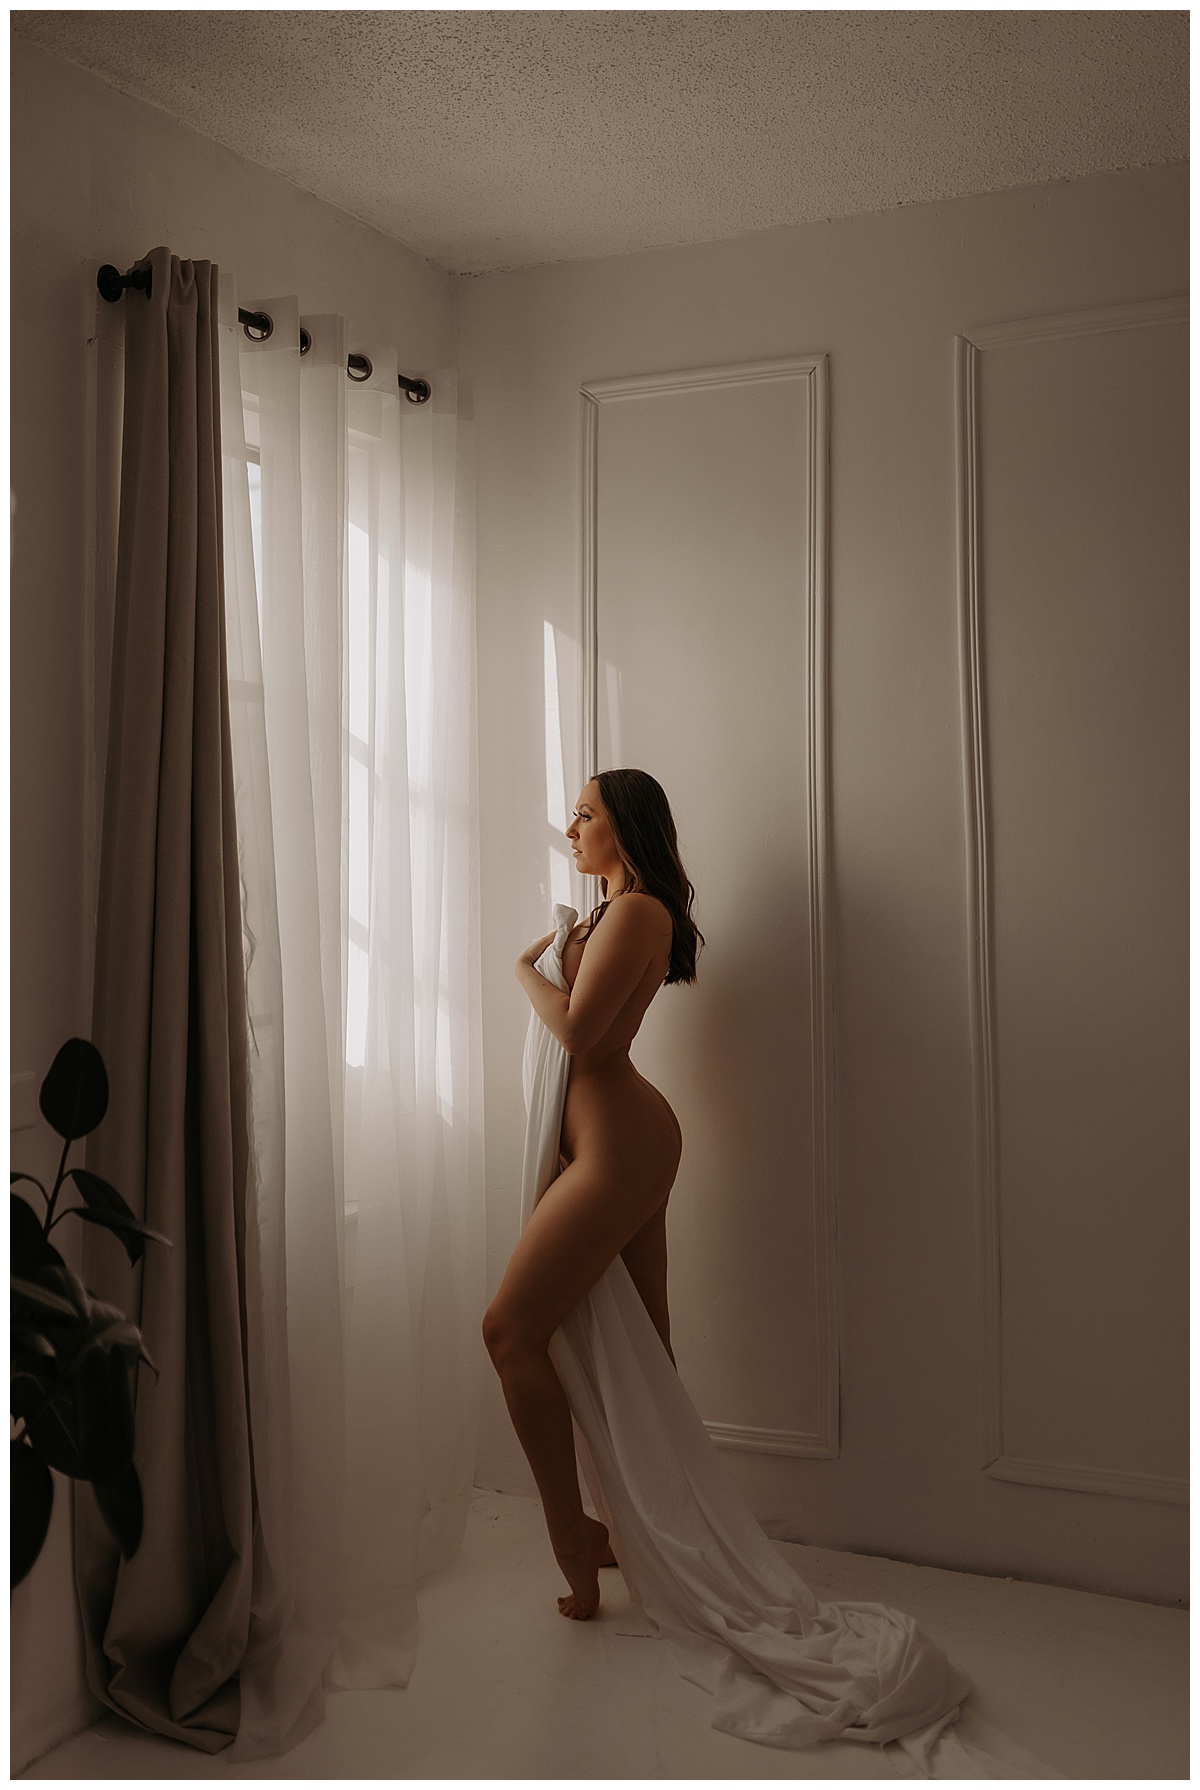 Adult covers her body with a white sheet standing in front of the window for Mary Castillo Photography